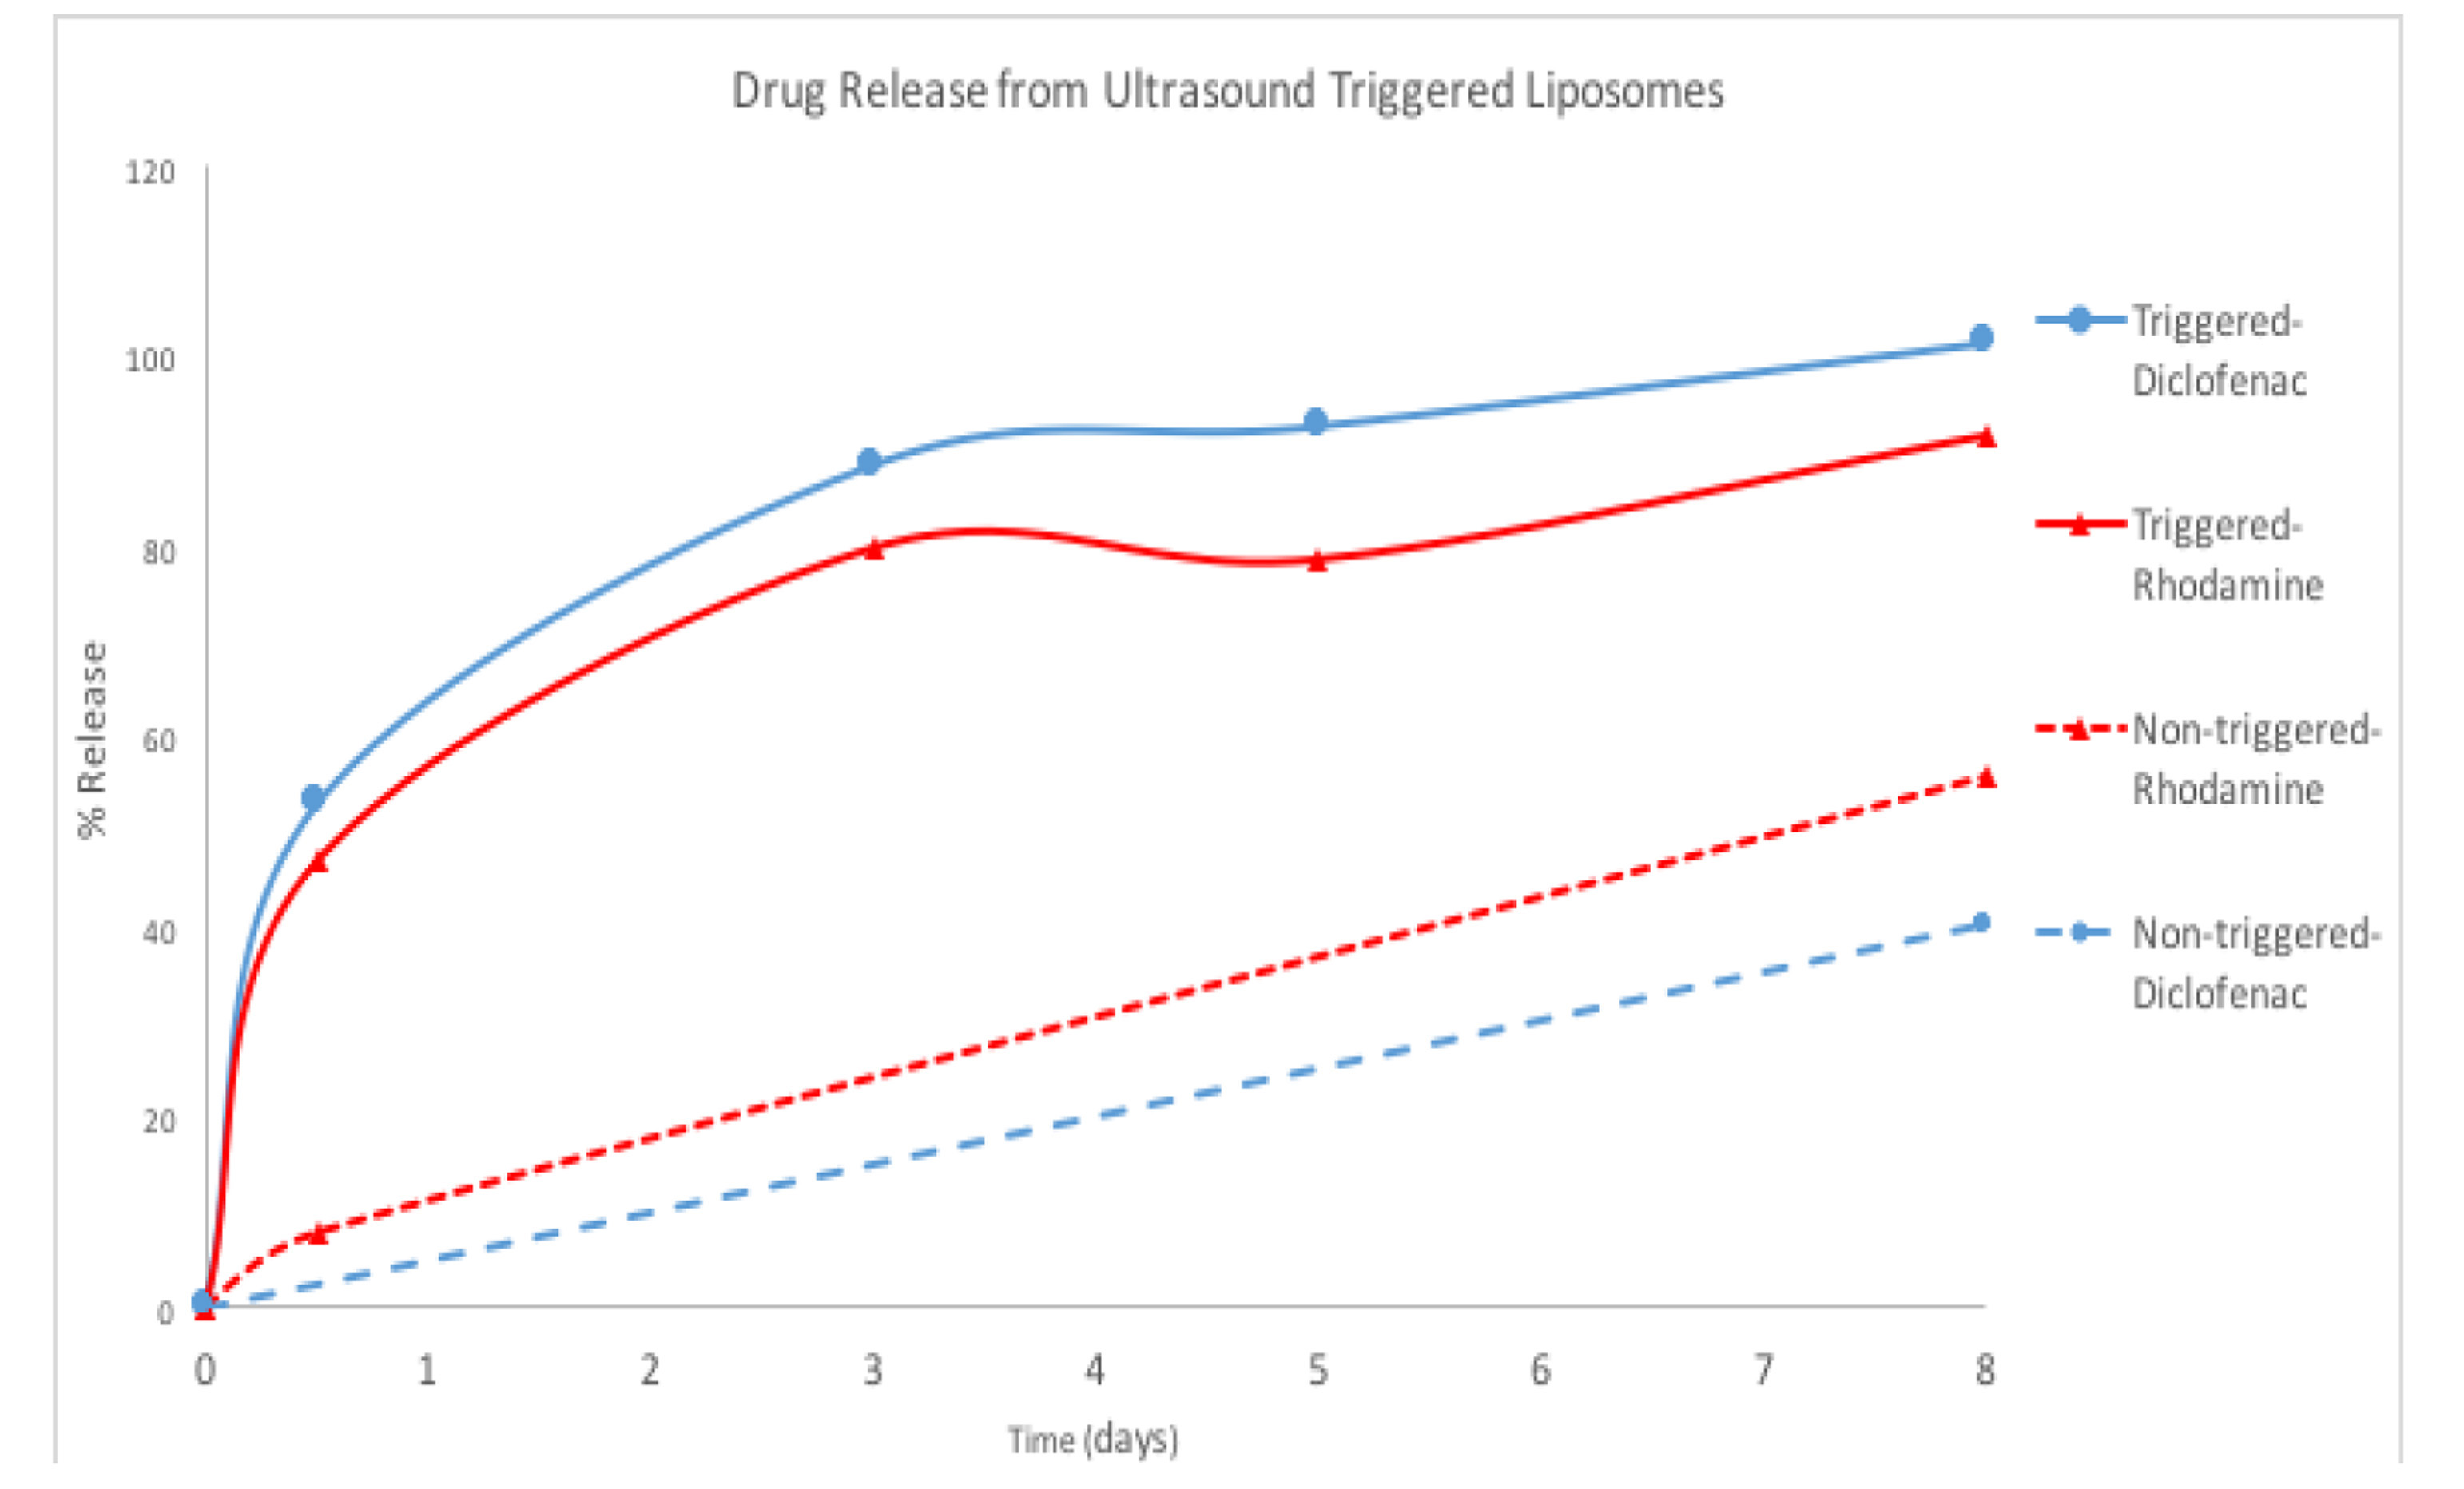 Graph of Drug Release